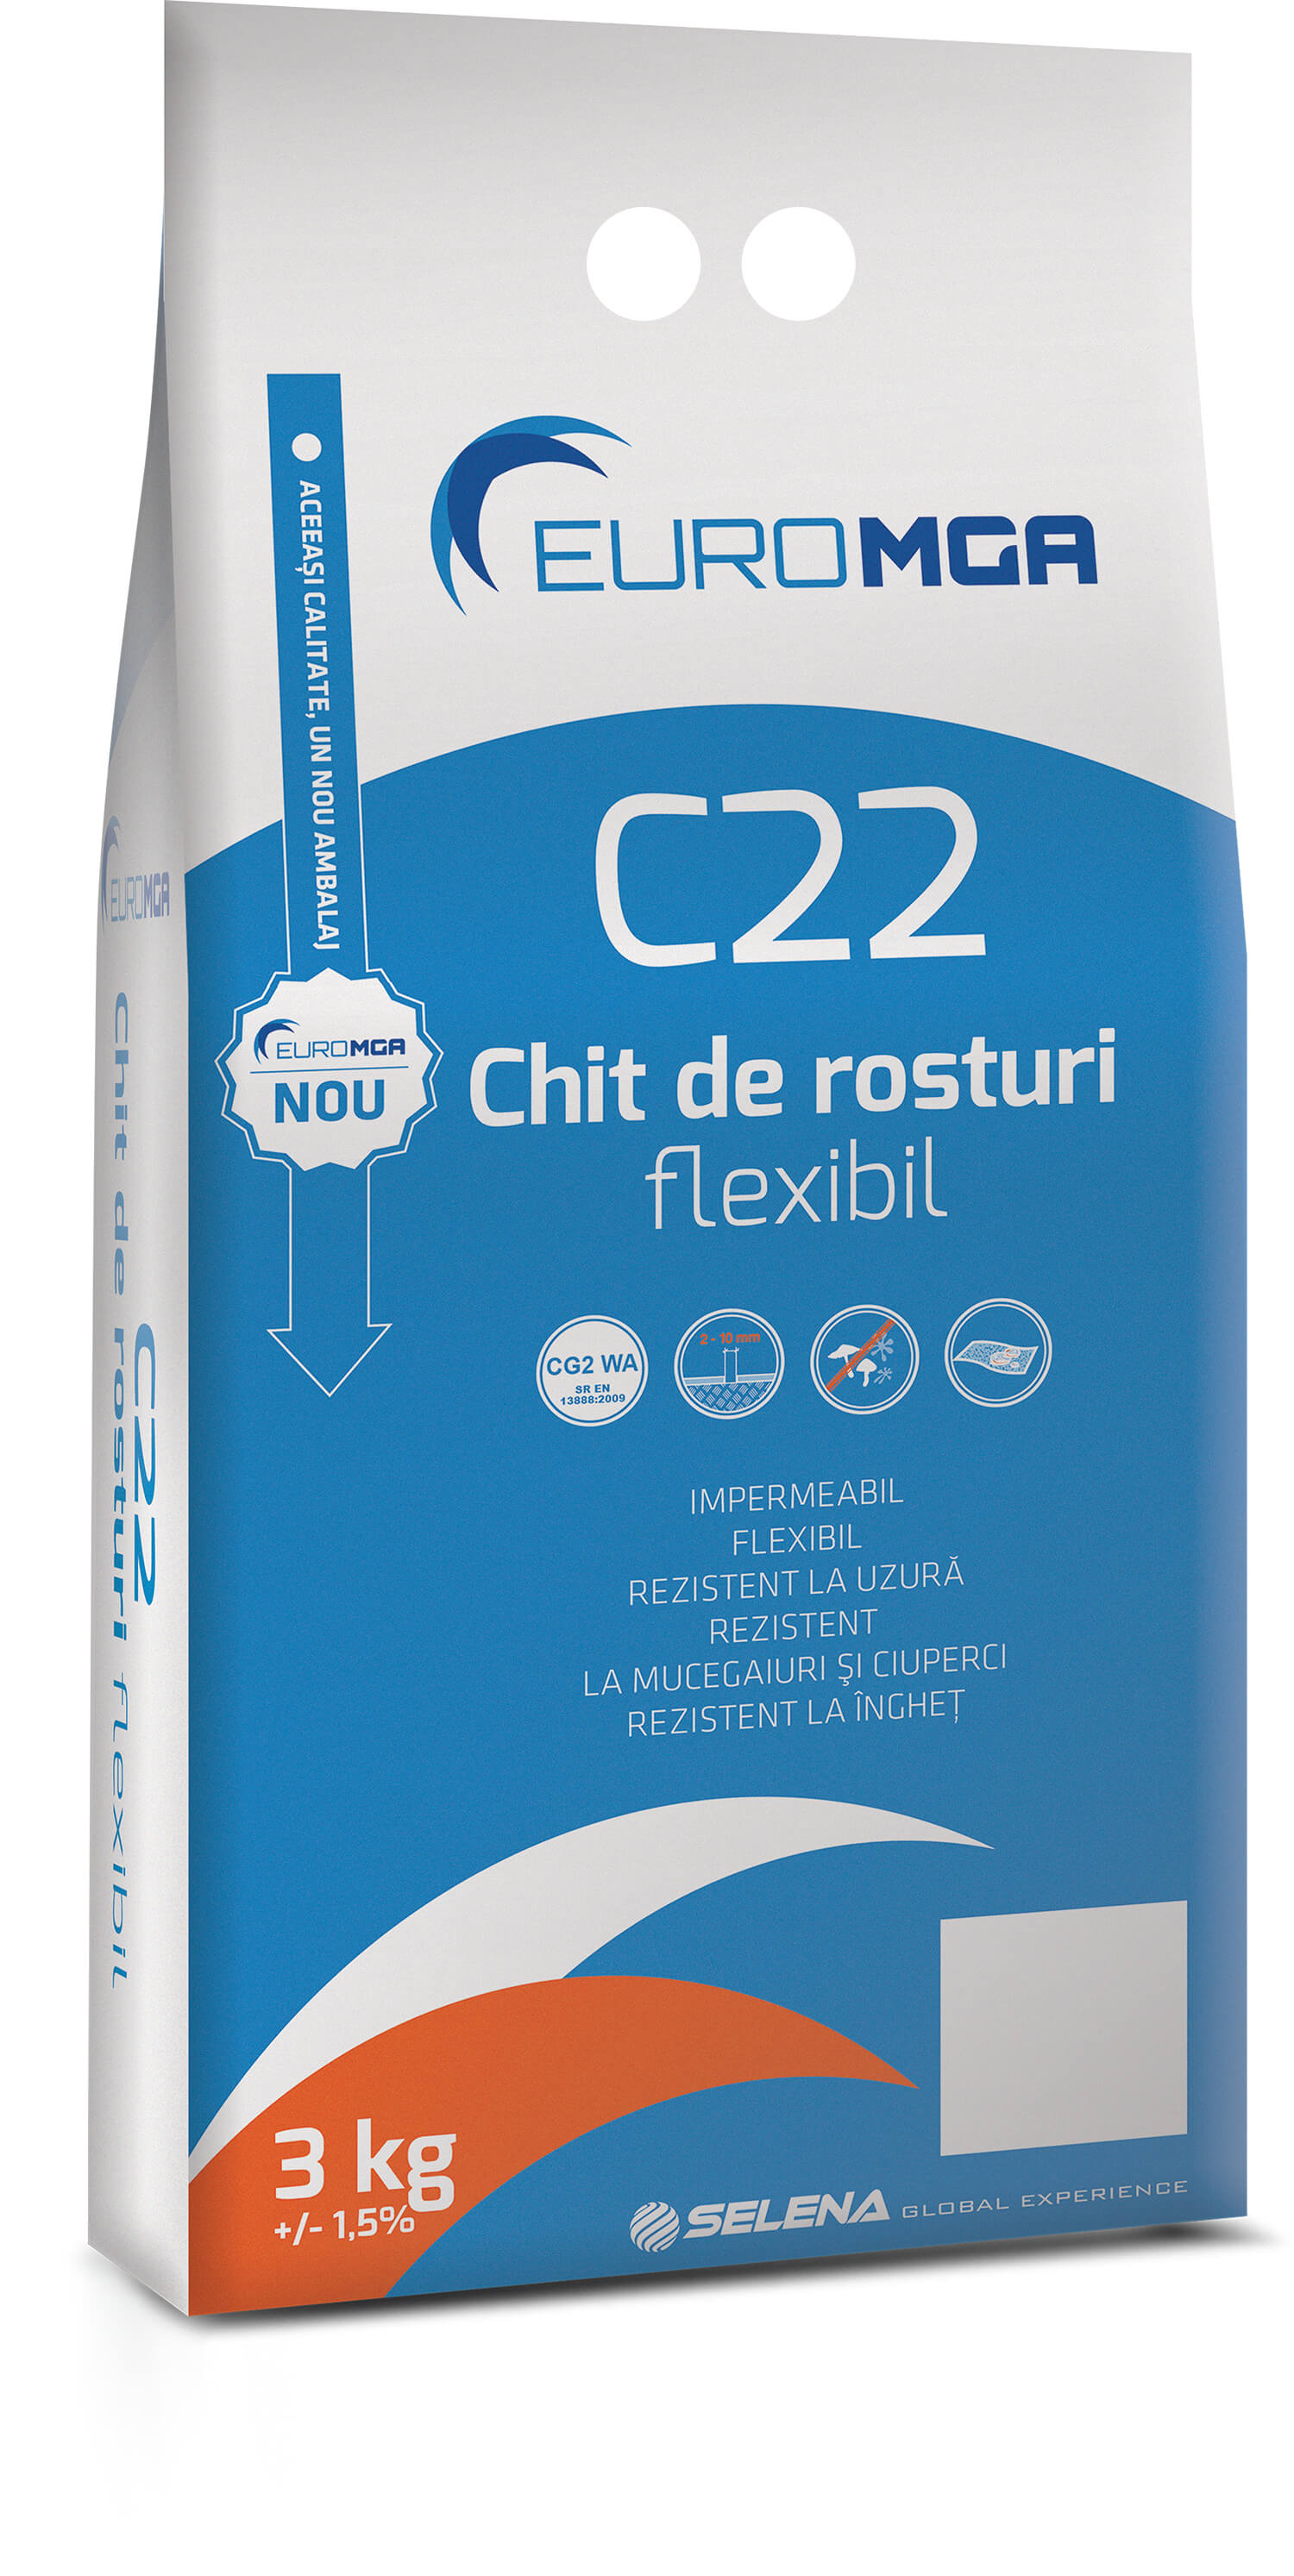 Joints - Flexible Chocolate White C22 EuroMGA 3kg grout, maxbau.ro